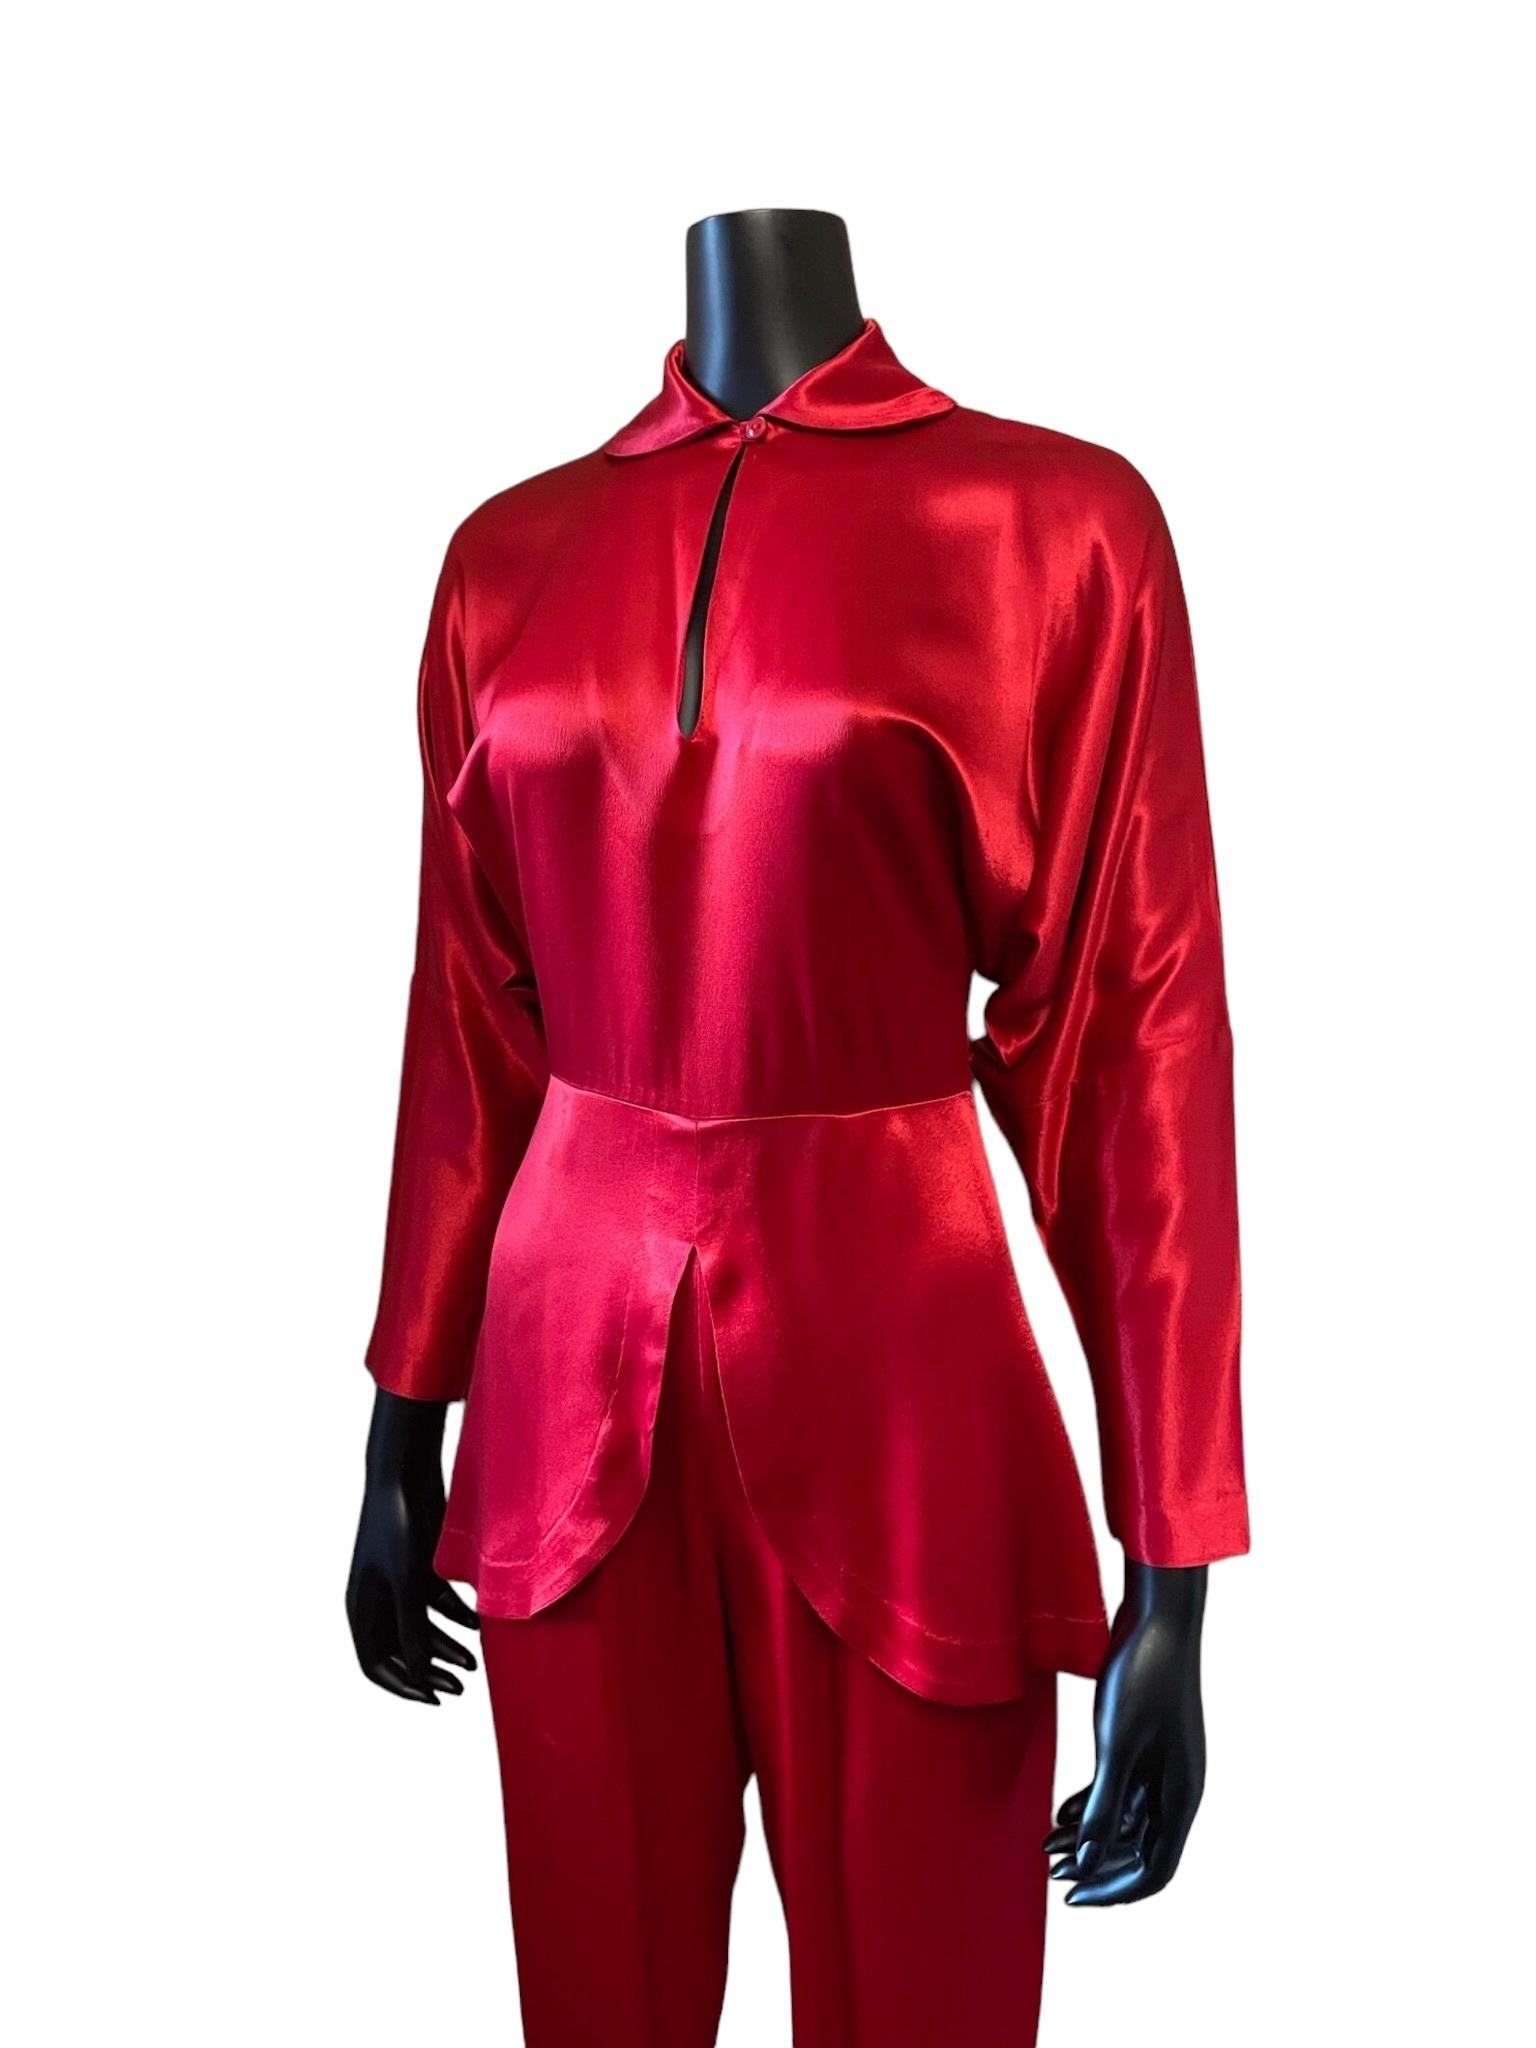 Women's Norma Kamali lipstick red jumpsuit For Sale